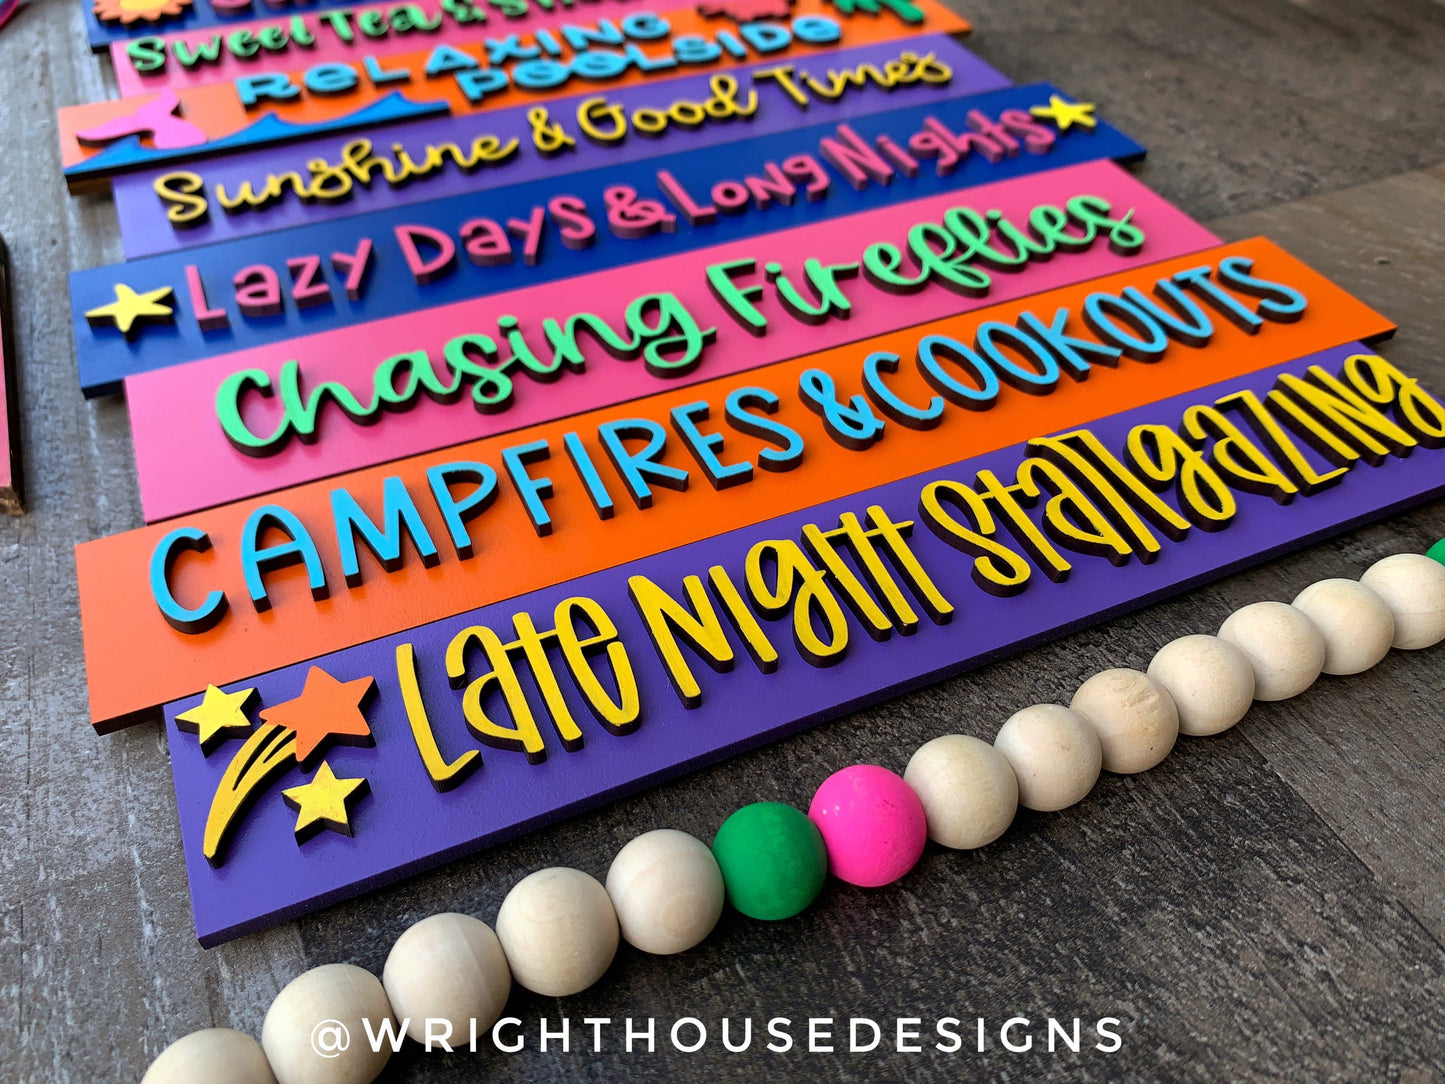 Sweet Summertime Bucket List Stacked Sign - Seasonal Wall Decor and DIY Kits - Cut File For Glowforge Lasers - Digital SVG File